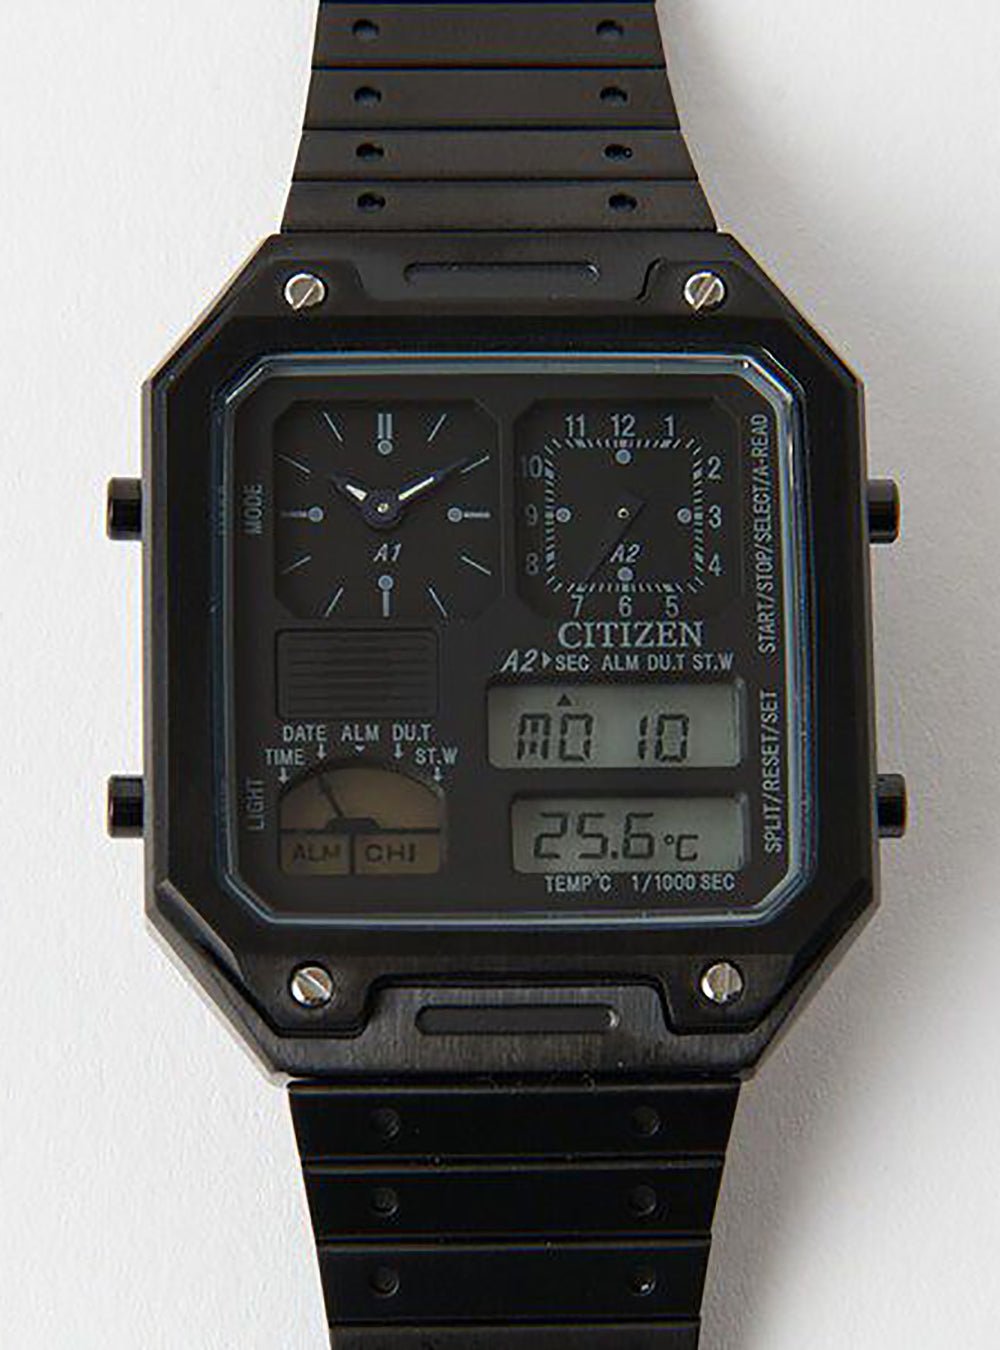 CITIZEN COLLECTION RECORD LABEL THERMO SENSOR ANA-DIGI TEMP JG2125-61 BEAUTY & YOUTH MODEL LIMITED EDITION JAPAN MOV'T JDMWatchesjapan-select